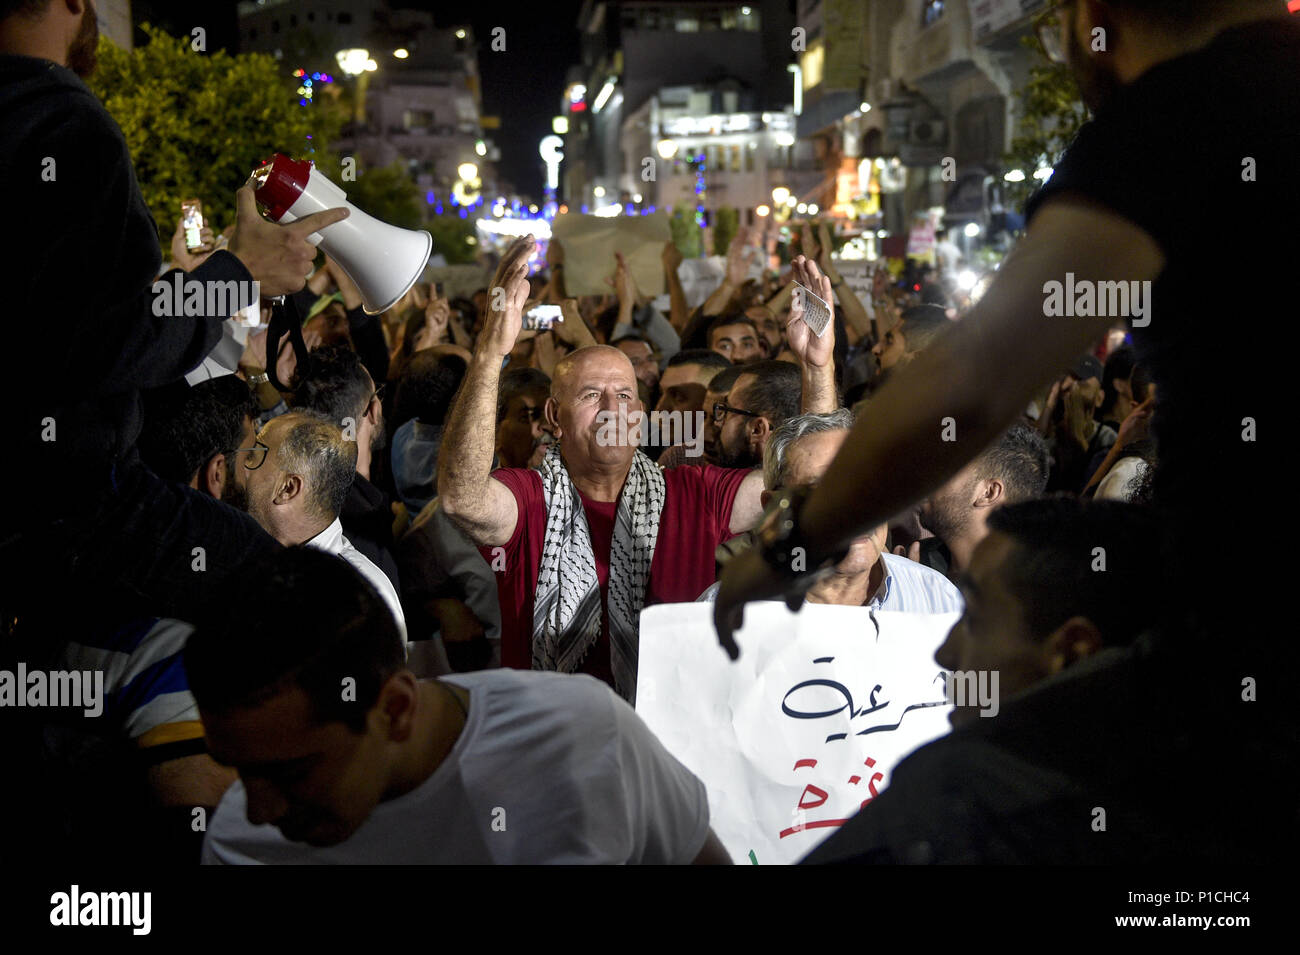 Ramallah, Palestinian Territories, West Bank. 10th June, 2018. Men carrying signs with the images of Razan Al-Najar, a nurse killed by Israeli forces during clashes on the Israeli-Gaza border, lead a march in protest of Mahmoud Abass.Palestinians gathered in Al-Manara Square to march in protest of Mahmoud Abass and the Palestinian Authority. A group of pro-Abass supporters briefly scuffled with protesters, however the march remained peaceful after. Credit: Matthew Hatcher/SOPA Images/ZUMA Wire/Alamy Live News Stock Photo